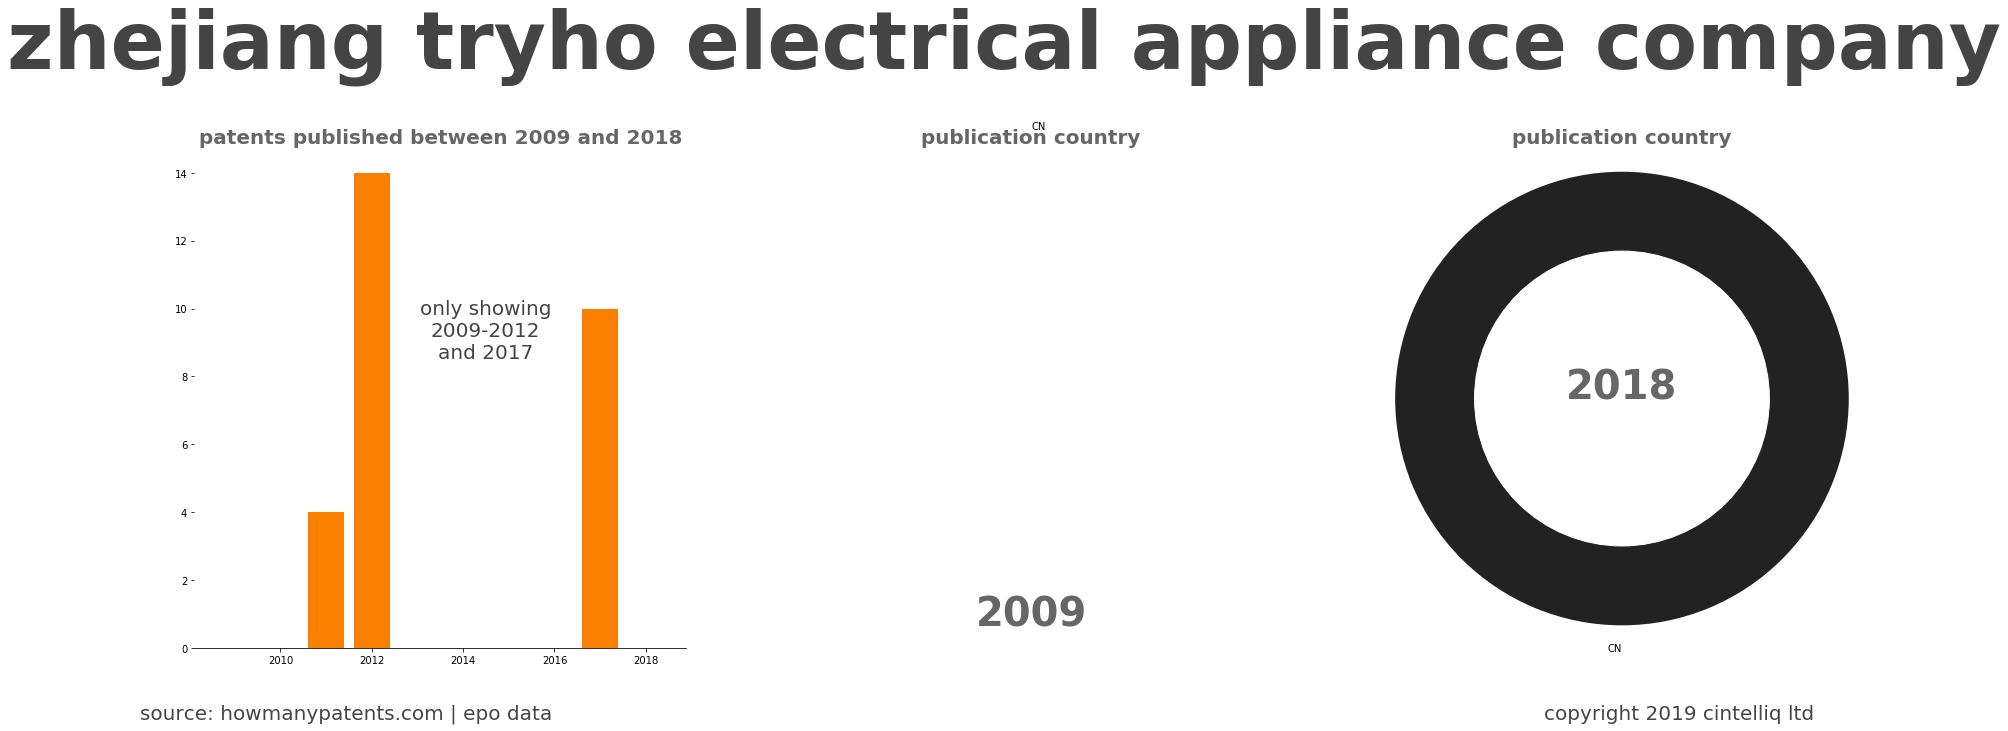 summary of patents for Zhejiang Tryho Electrical Appliance Company